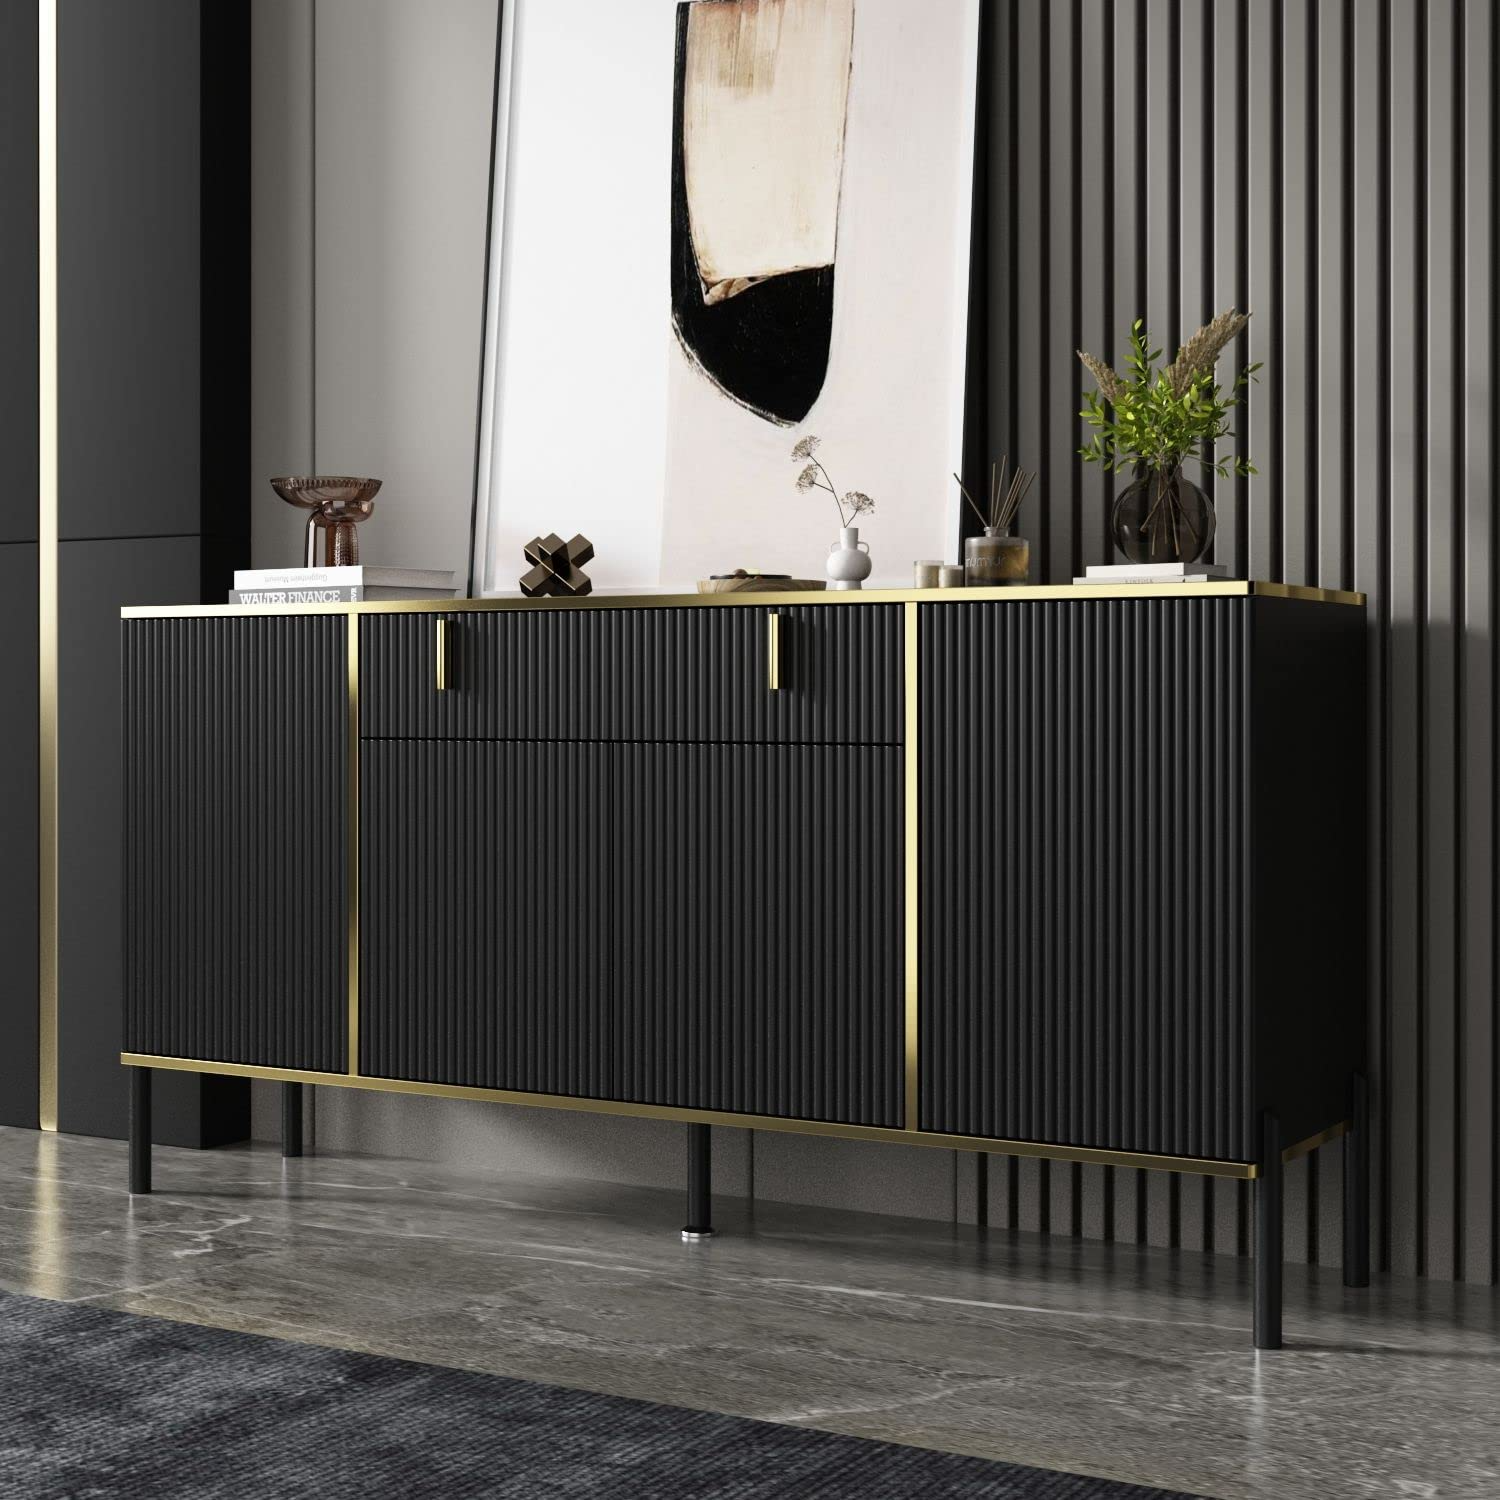 【Furniture】Modern Credenza Sideboard Buffet with Drawer & Pop-Up Doors ...